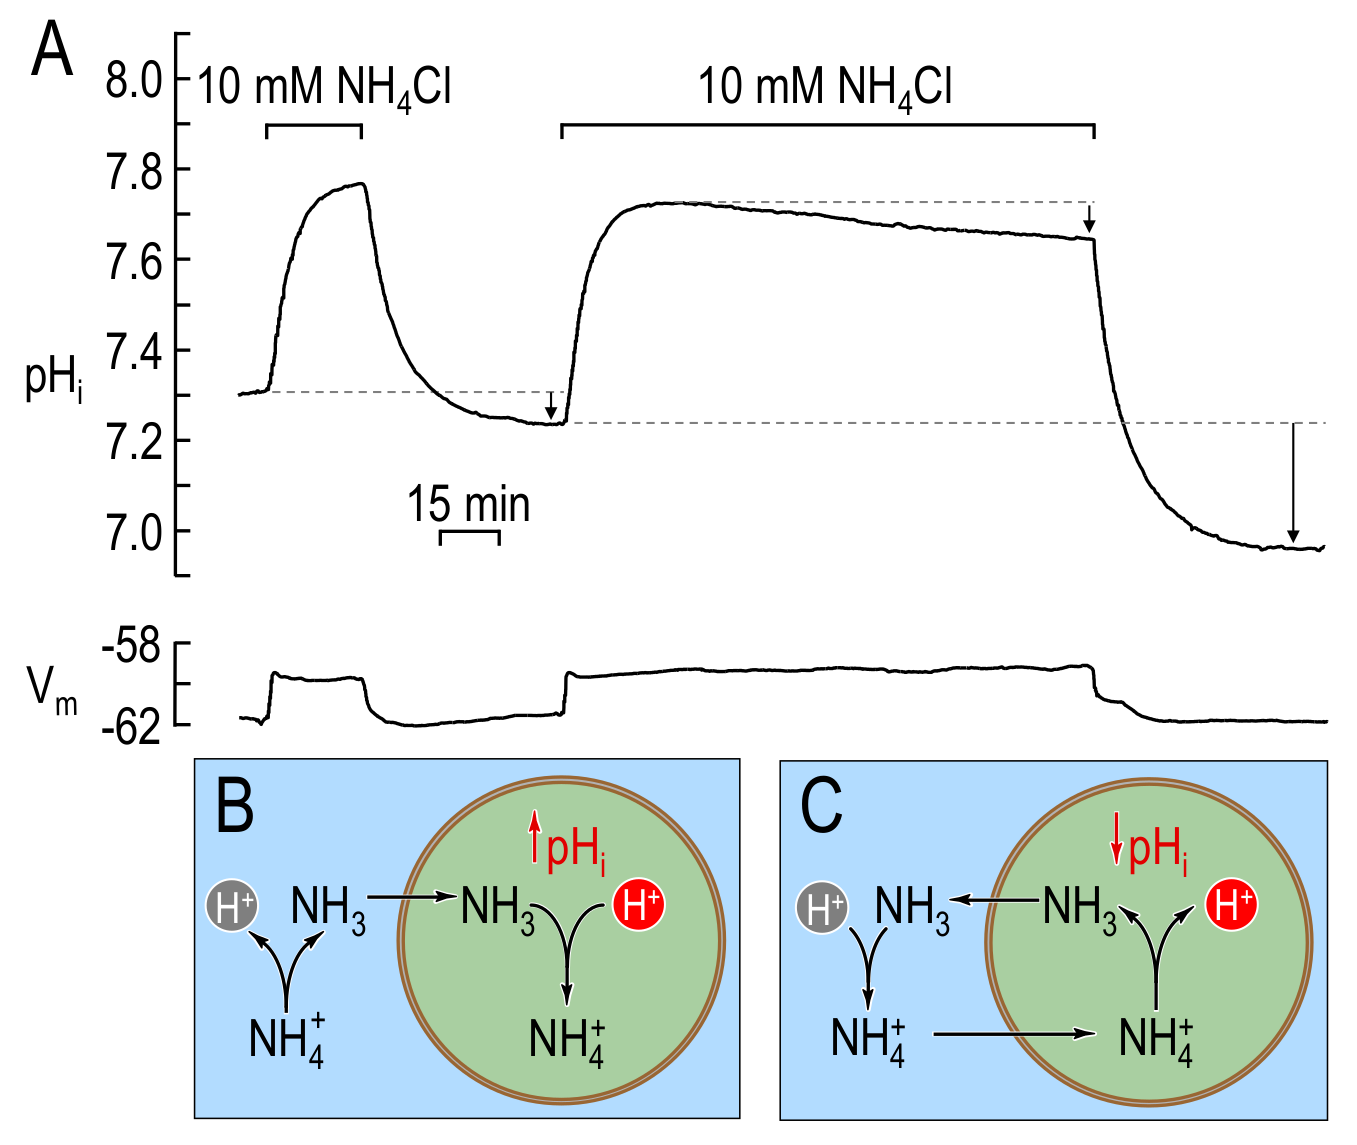 \mathrm{pH_i} changes caused by a short and a long exposure of a squid giant axon to extracellular \mathrm{NH_3}/\mathrm{NH_4^+} in the bulk solution. (A) Original \mathrm{pH_i} and V_\mathrm{m} traces from figure 2 of BDW. A short exposure of the axon to extracellular \mathrm{NH_3}/\mathrm{NH_4^+} causes a rapid rise in \mathrm{pH_i}, followed by a \mathrm{pH_i} decay that modestly undershoots (lower short arrow) its initial resting value upon removal of extracellular \mathrm{NH_3}/\mathrm{NH_4^+}. A longer exposure of squid giant axons to extracellular \mathrm{NH_3}/\mathrm{NH_4^+} causes a rapid rise in \mathrm{pH_i}, followed by a slow and sustained \mathrm{pH_i} decay. Removing extracellular \mathrm{NH_3}/\mathrm{NH_4^+} causes \mathrm{pH_i} to undershoot substantially its initial resting value (long arrow). Both the plateau-phase acidification (upper short arrow) and the undershoot (long arrow) are indicative of net acid loading during the period of \mathrm{NH_3}/\mathrm{NH_4^+} exposure. (B) Cartoon illustrating the processes underlying the initial alkalinisation phase in (A) for both short and long exposures to extracellular \mathrm{NH_3}/\mathrm{NH_4^+}. The initial entry of \mathrm{NH_3} leads to the intracellular consumption of \mathrm{H^+} (and thus to the observed \mathrm{pH_i} rise) via the reaction \mathrm{NH_3}+\mathrm{H^+} \longrightarrow \mathrm{NH^+_4}. (C) Cartoon illustrating the processes underlying the plateau-phase acidification during the long \mathrm{NH_3}/\mathrm{NH_4^+} exposure in (A). After \mathrm{NH_3} equilibration across the plasma membrane (\mathrm{pH_i} peak in panel (A)), the slow entry of \mathrm{NH_4^+} — which has always been present but overwhelmed by the influx of \mathrm{NH_3} — leads to the production of \mathrm{H^+} (and thus to the observed slow \mathrm{pH_i} decay during the plateau phase) via the reaction \mathrm{NH^+_4} \longrightarrow \mathrm{NH_3}+\mathrm{H^+}. The newly formed \mathrm{NH_3} then exits the cell. The \mathrm{pH_i} undershoots observed upon removal of extracellular \mathrm{NH_3}/\mathrm{NH_4^+}, during both short and long \mathrm{NH_3}/\mathrm{NH_4^+} exposures, are the result of the accumulation of \mathrm{NH_4^+} during exposure to extracellular \mathrm{NH_3}/\mathrm{NH_4^+}. BDW used the mathematical model to postulate the above sequence of events, including both the plateau-phase acidification and the \mathrm{pH_i} undershoot. (A), modified from . (B)-(C), modified from .